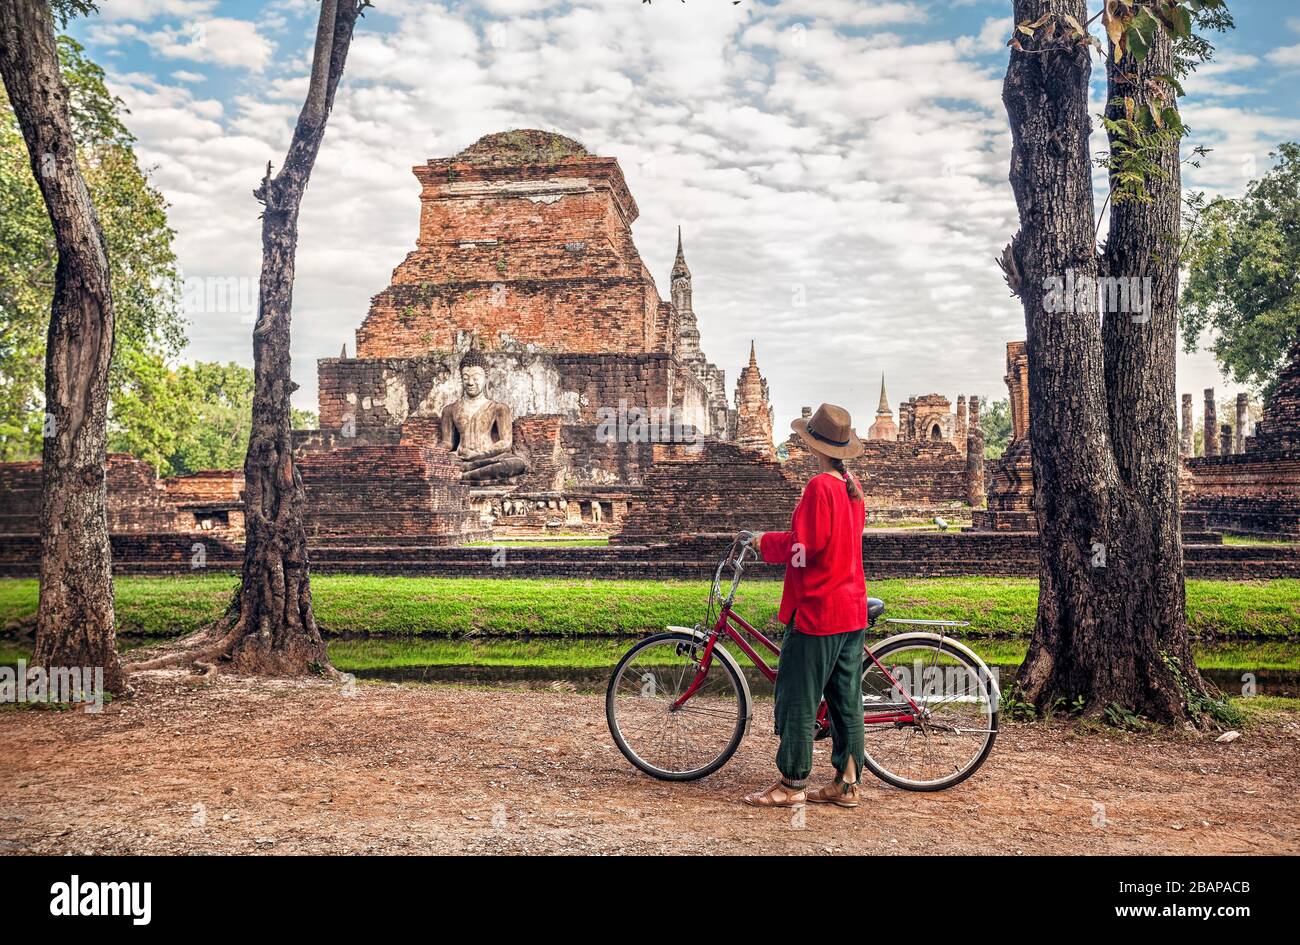 Woman in red shirt riding bicycle looking at old Buddhist temple in Sukhothai historical park, Thailand Stock Photo